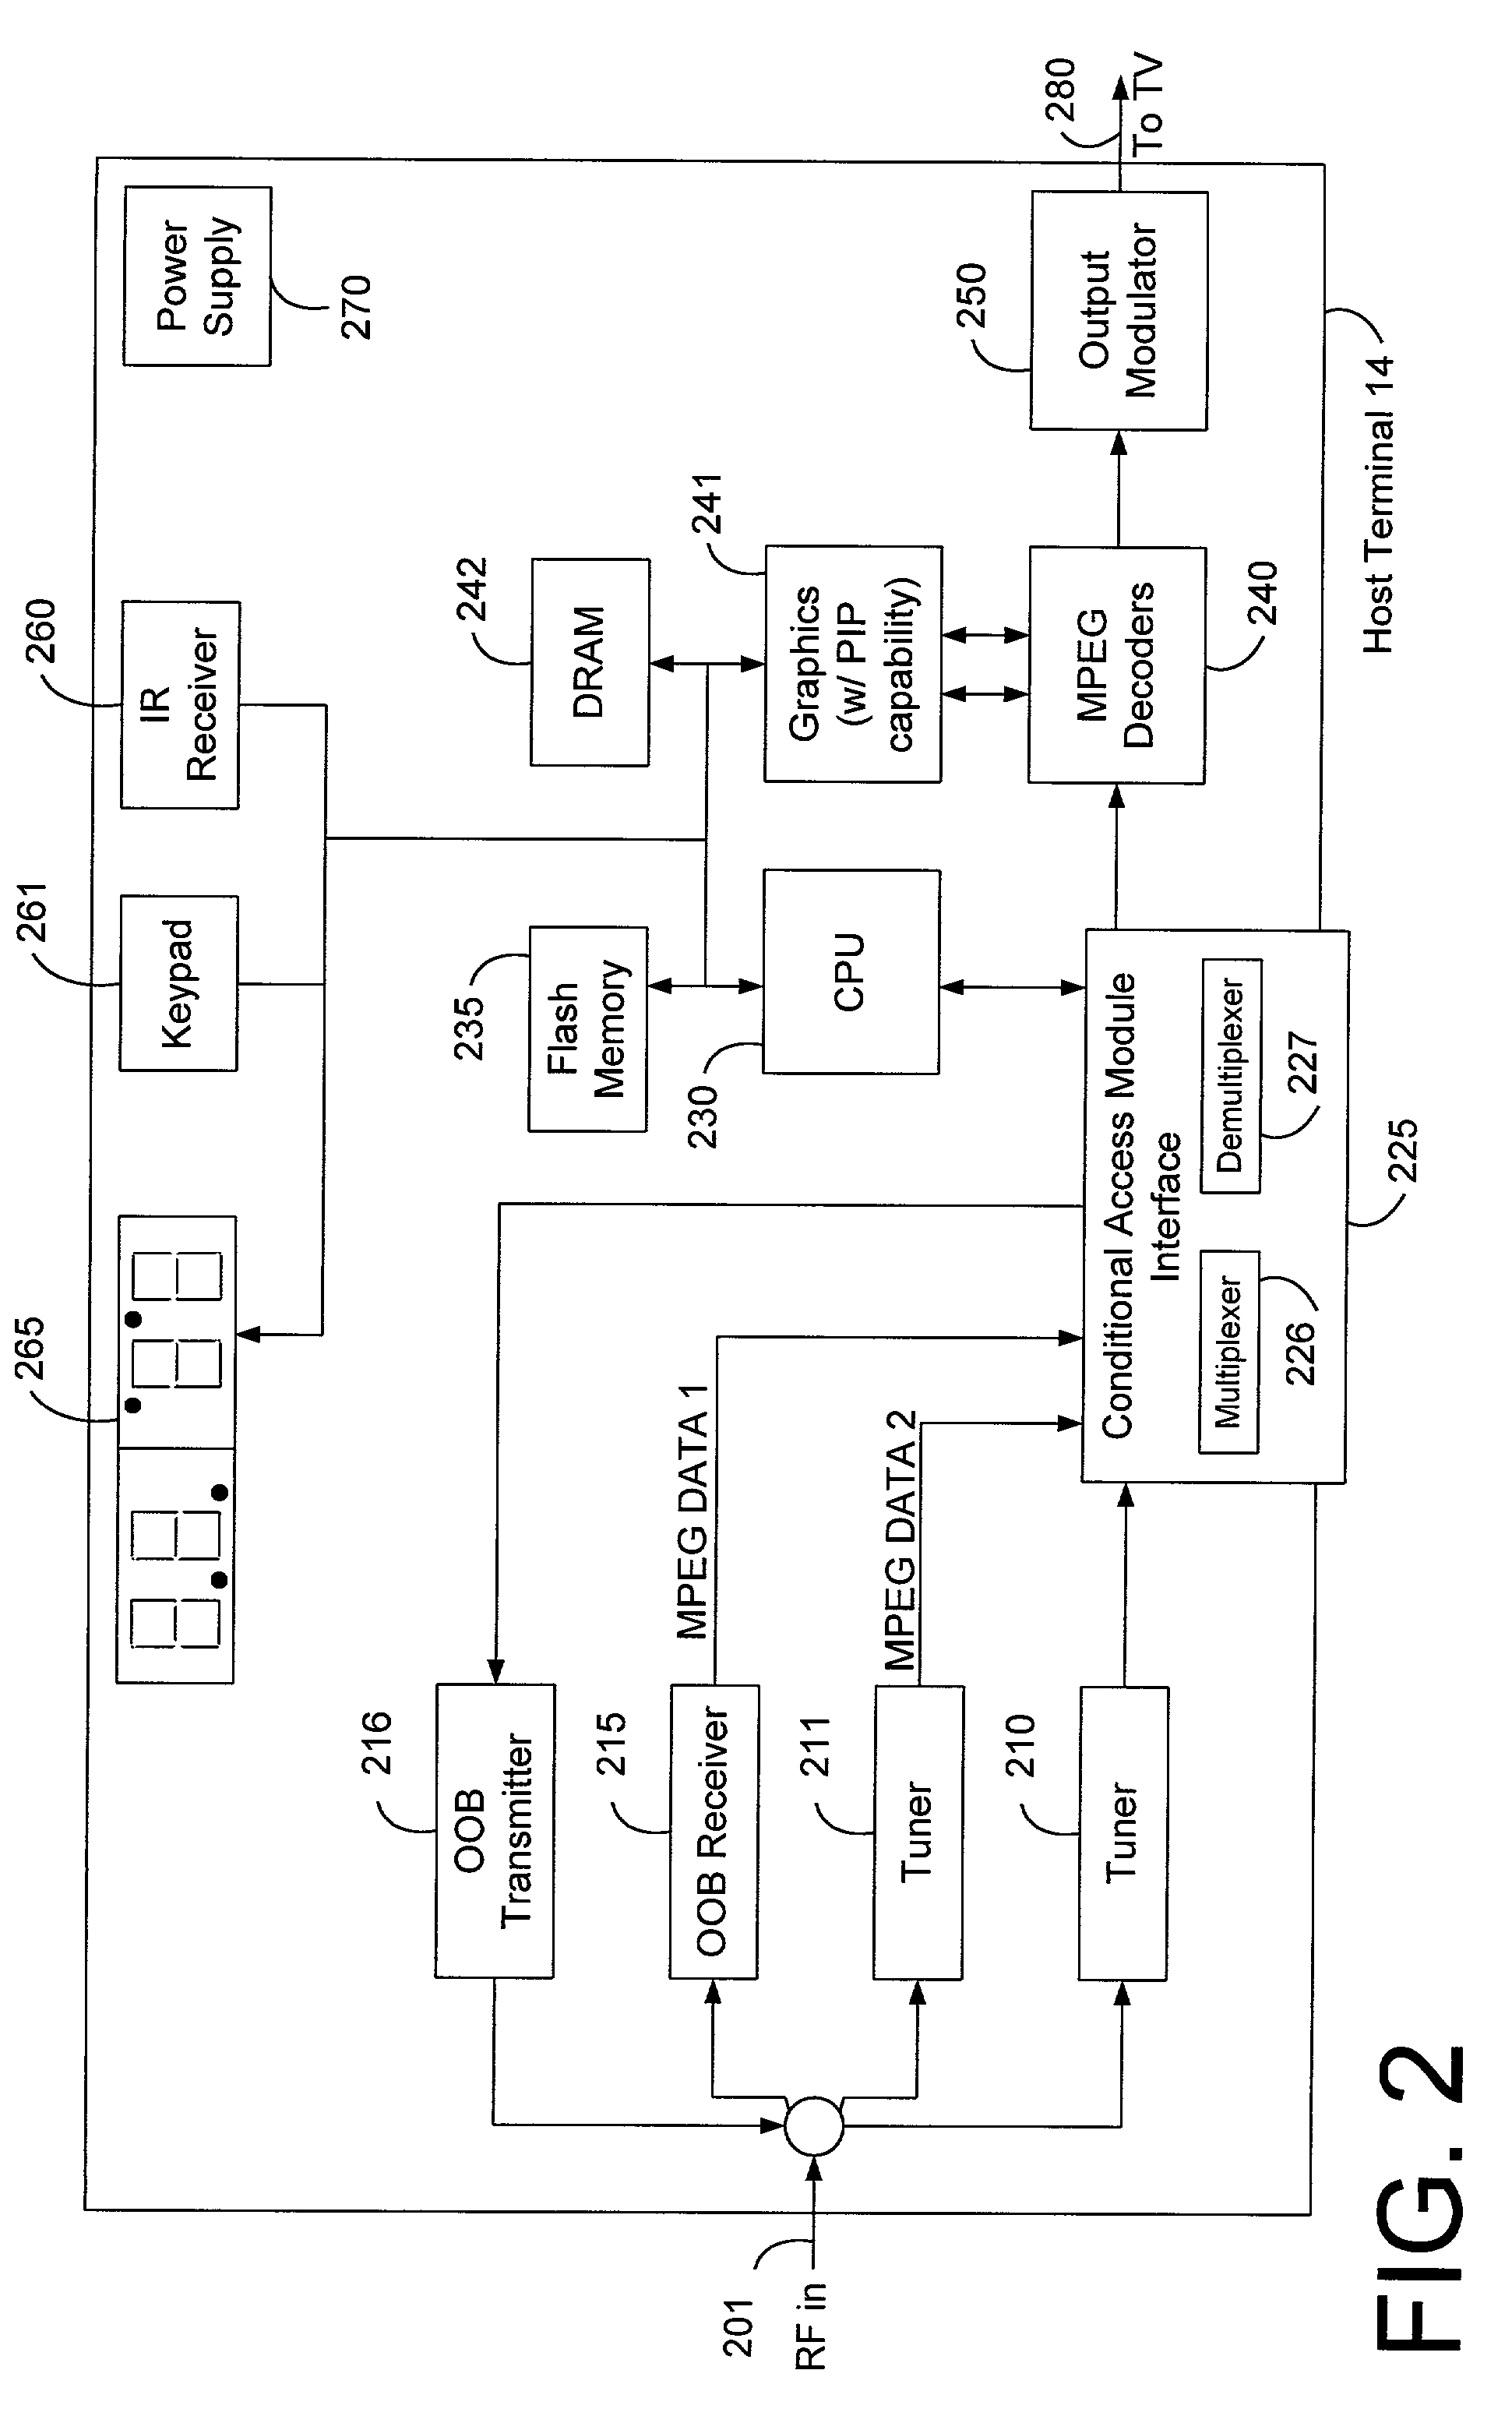 Method of identifying multiple digital streams within a multiplexed signal